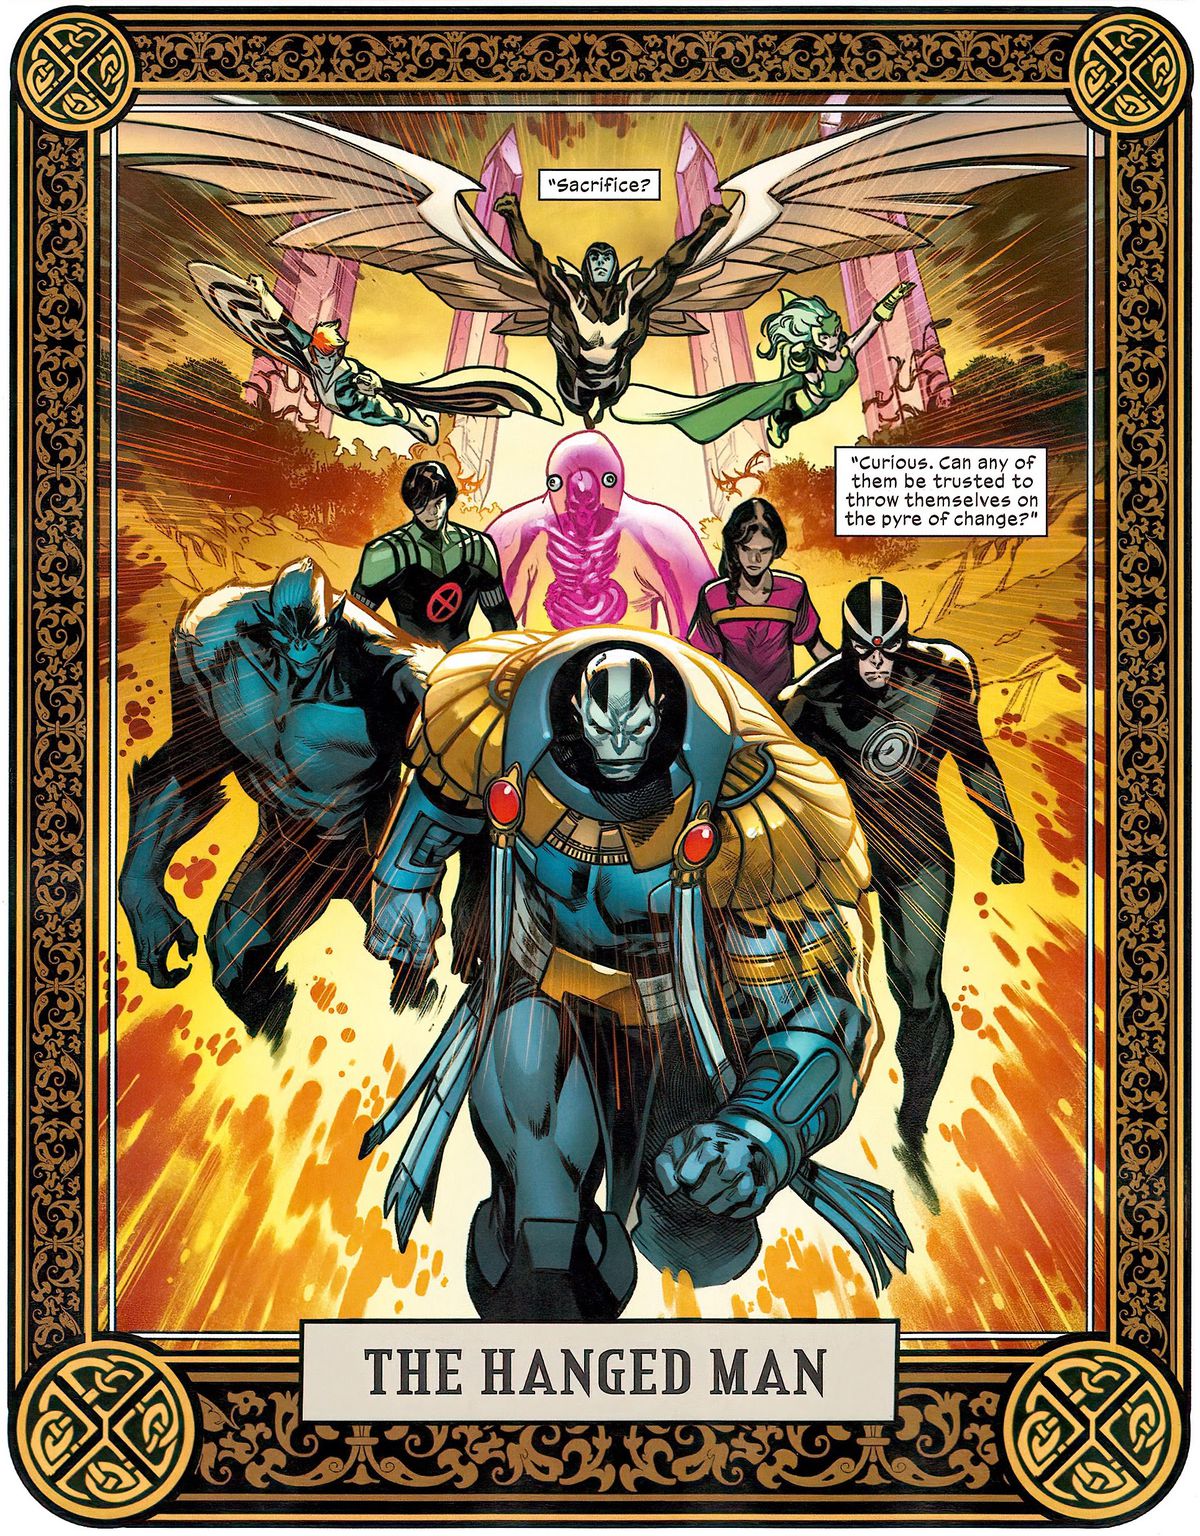 Banshee, Angel, Rogue, Blob Herman, Beast, Havok, Apocalypse and more on a “The Hanged Man” tarot card representing sacrifice and suspension for X- of Swords, in Free Comic Book Day X-Men, Marvel Comics (2020).